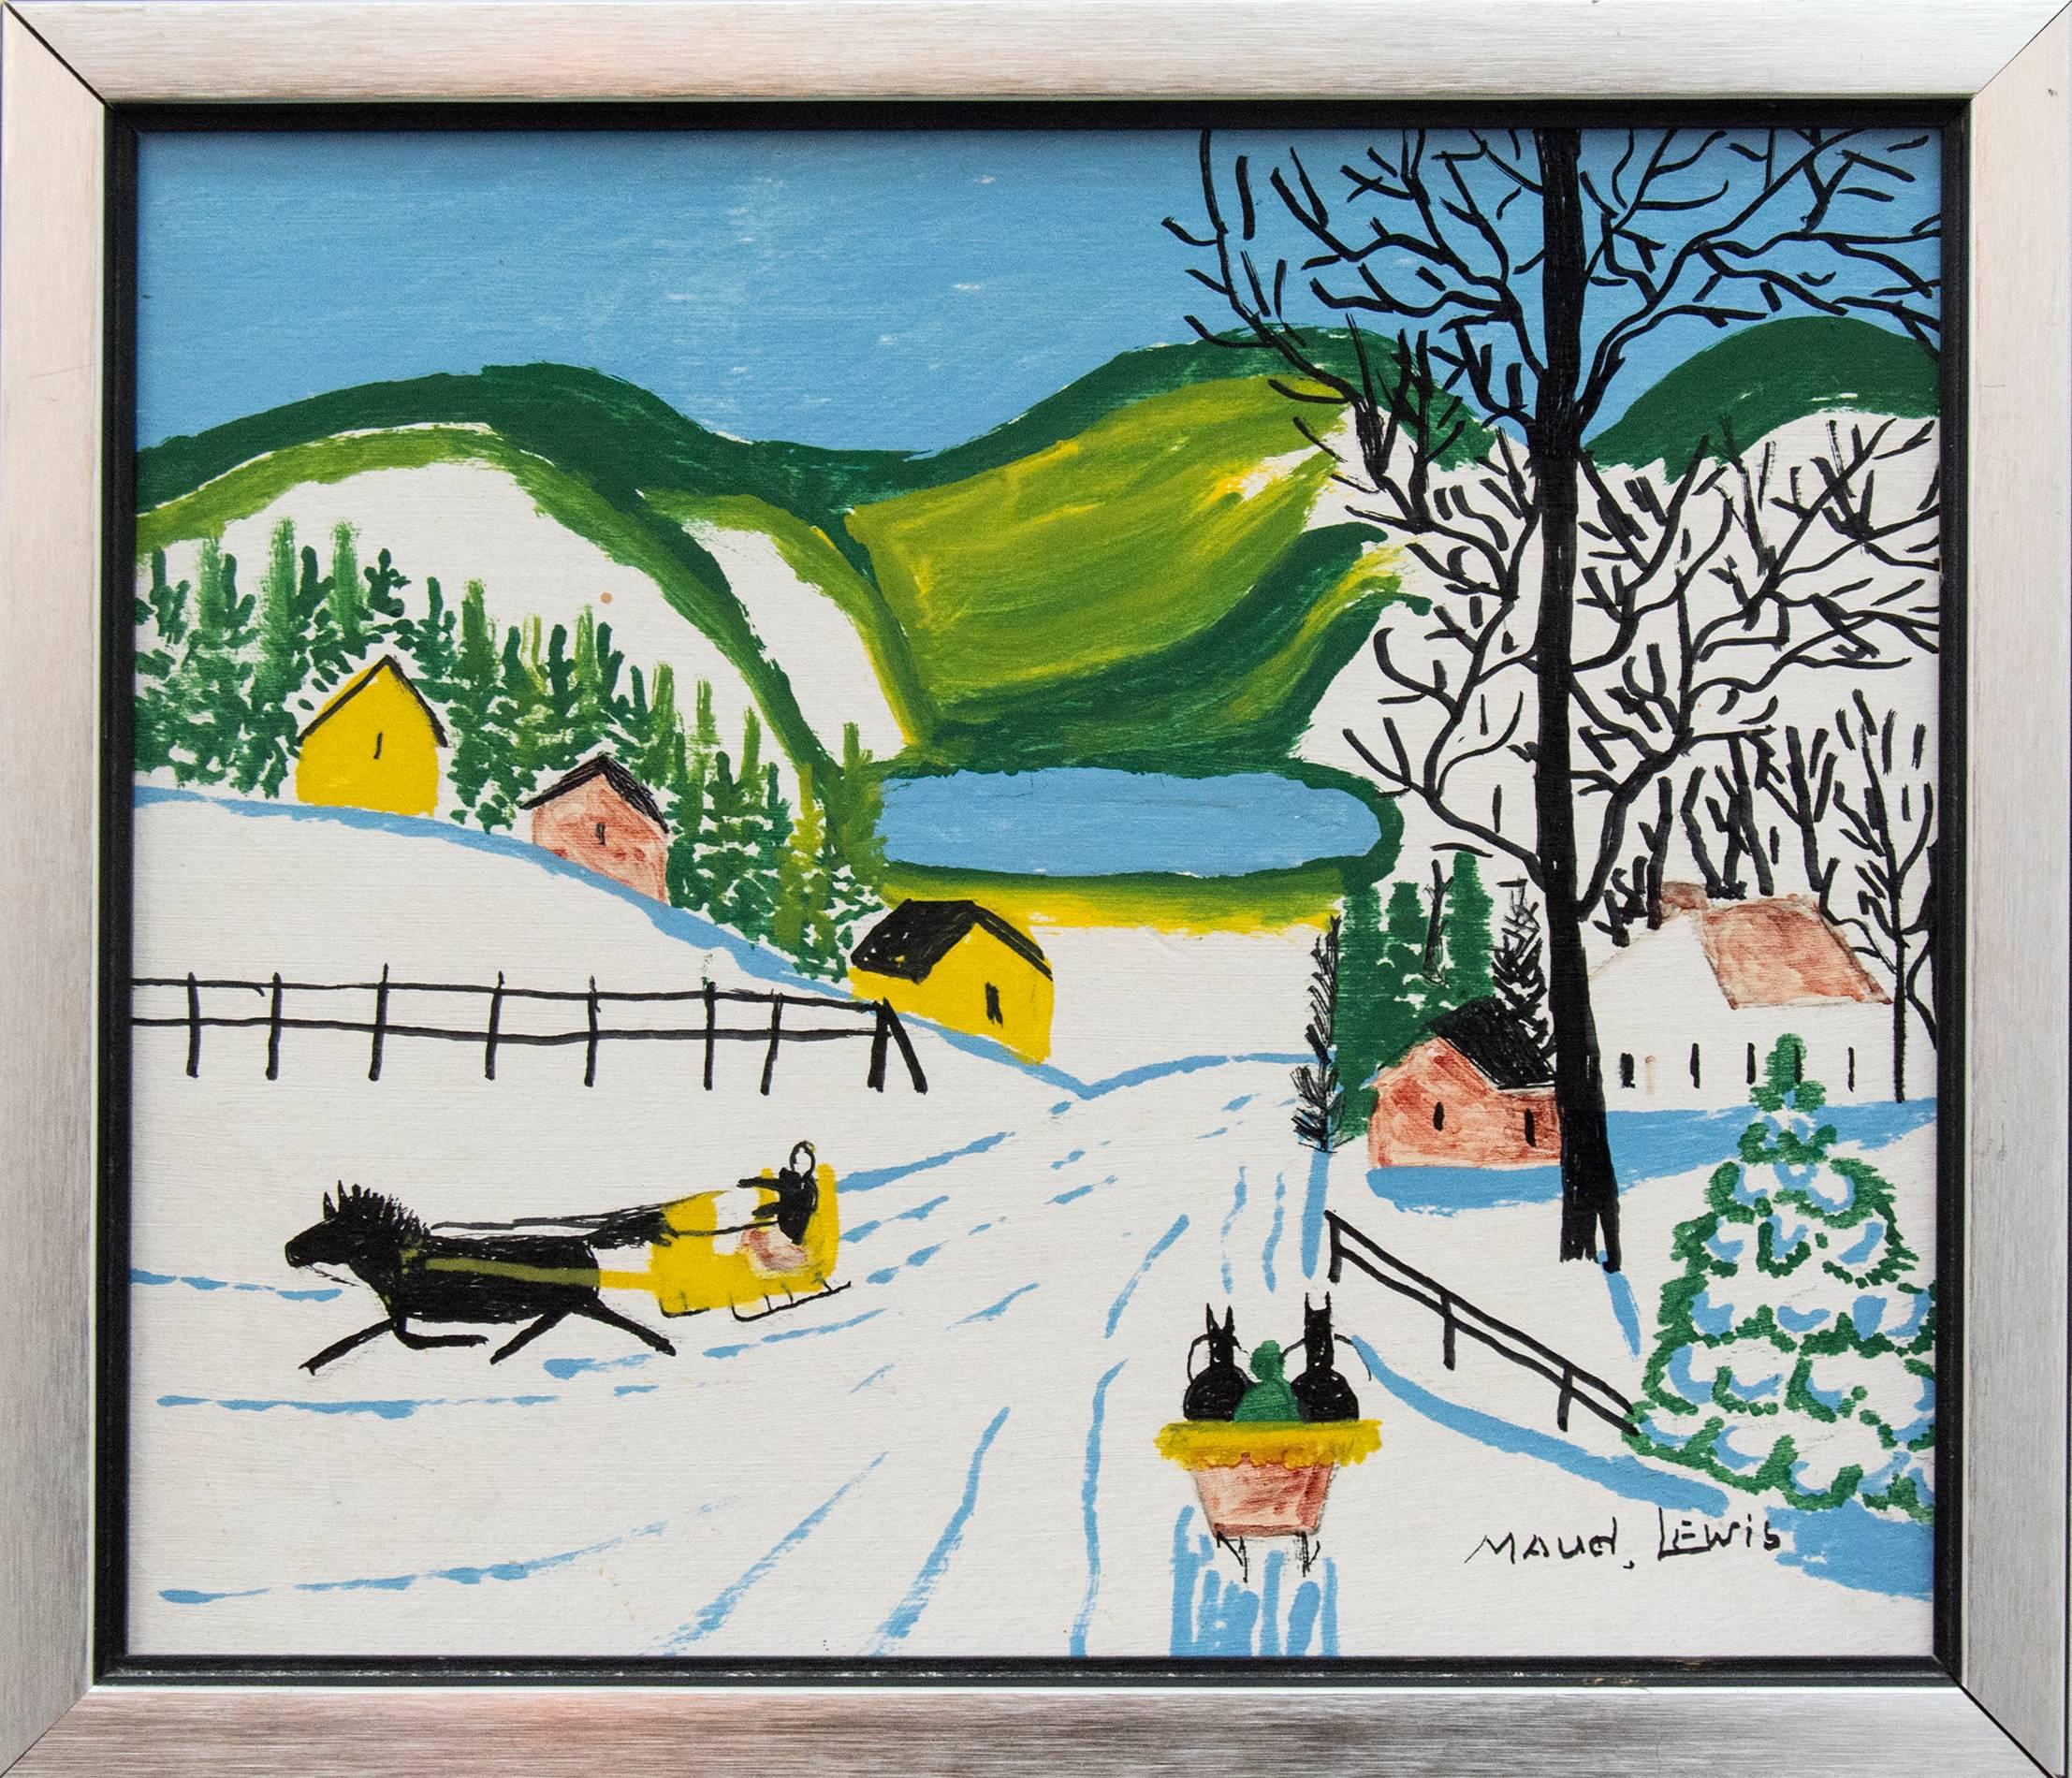 Sleighs in Winter - Contemporary Painting by Maud Lewis